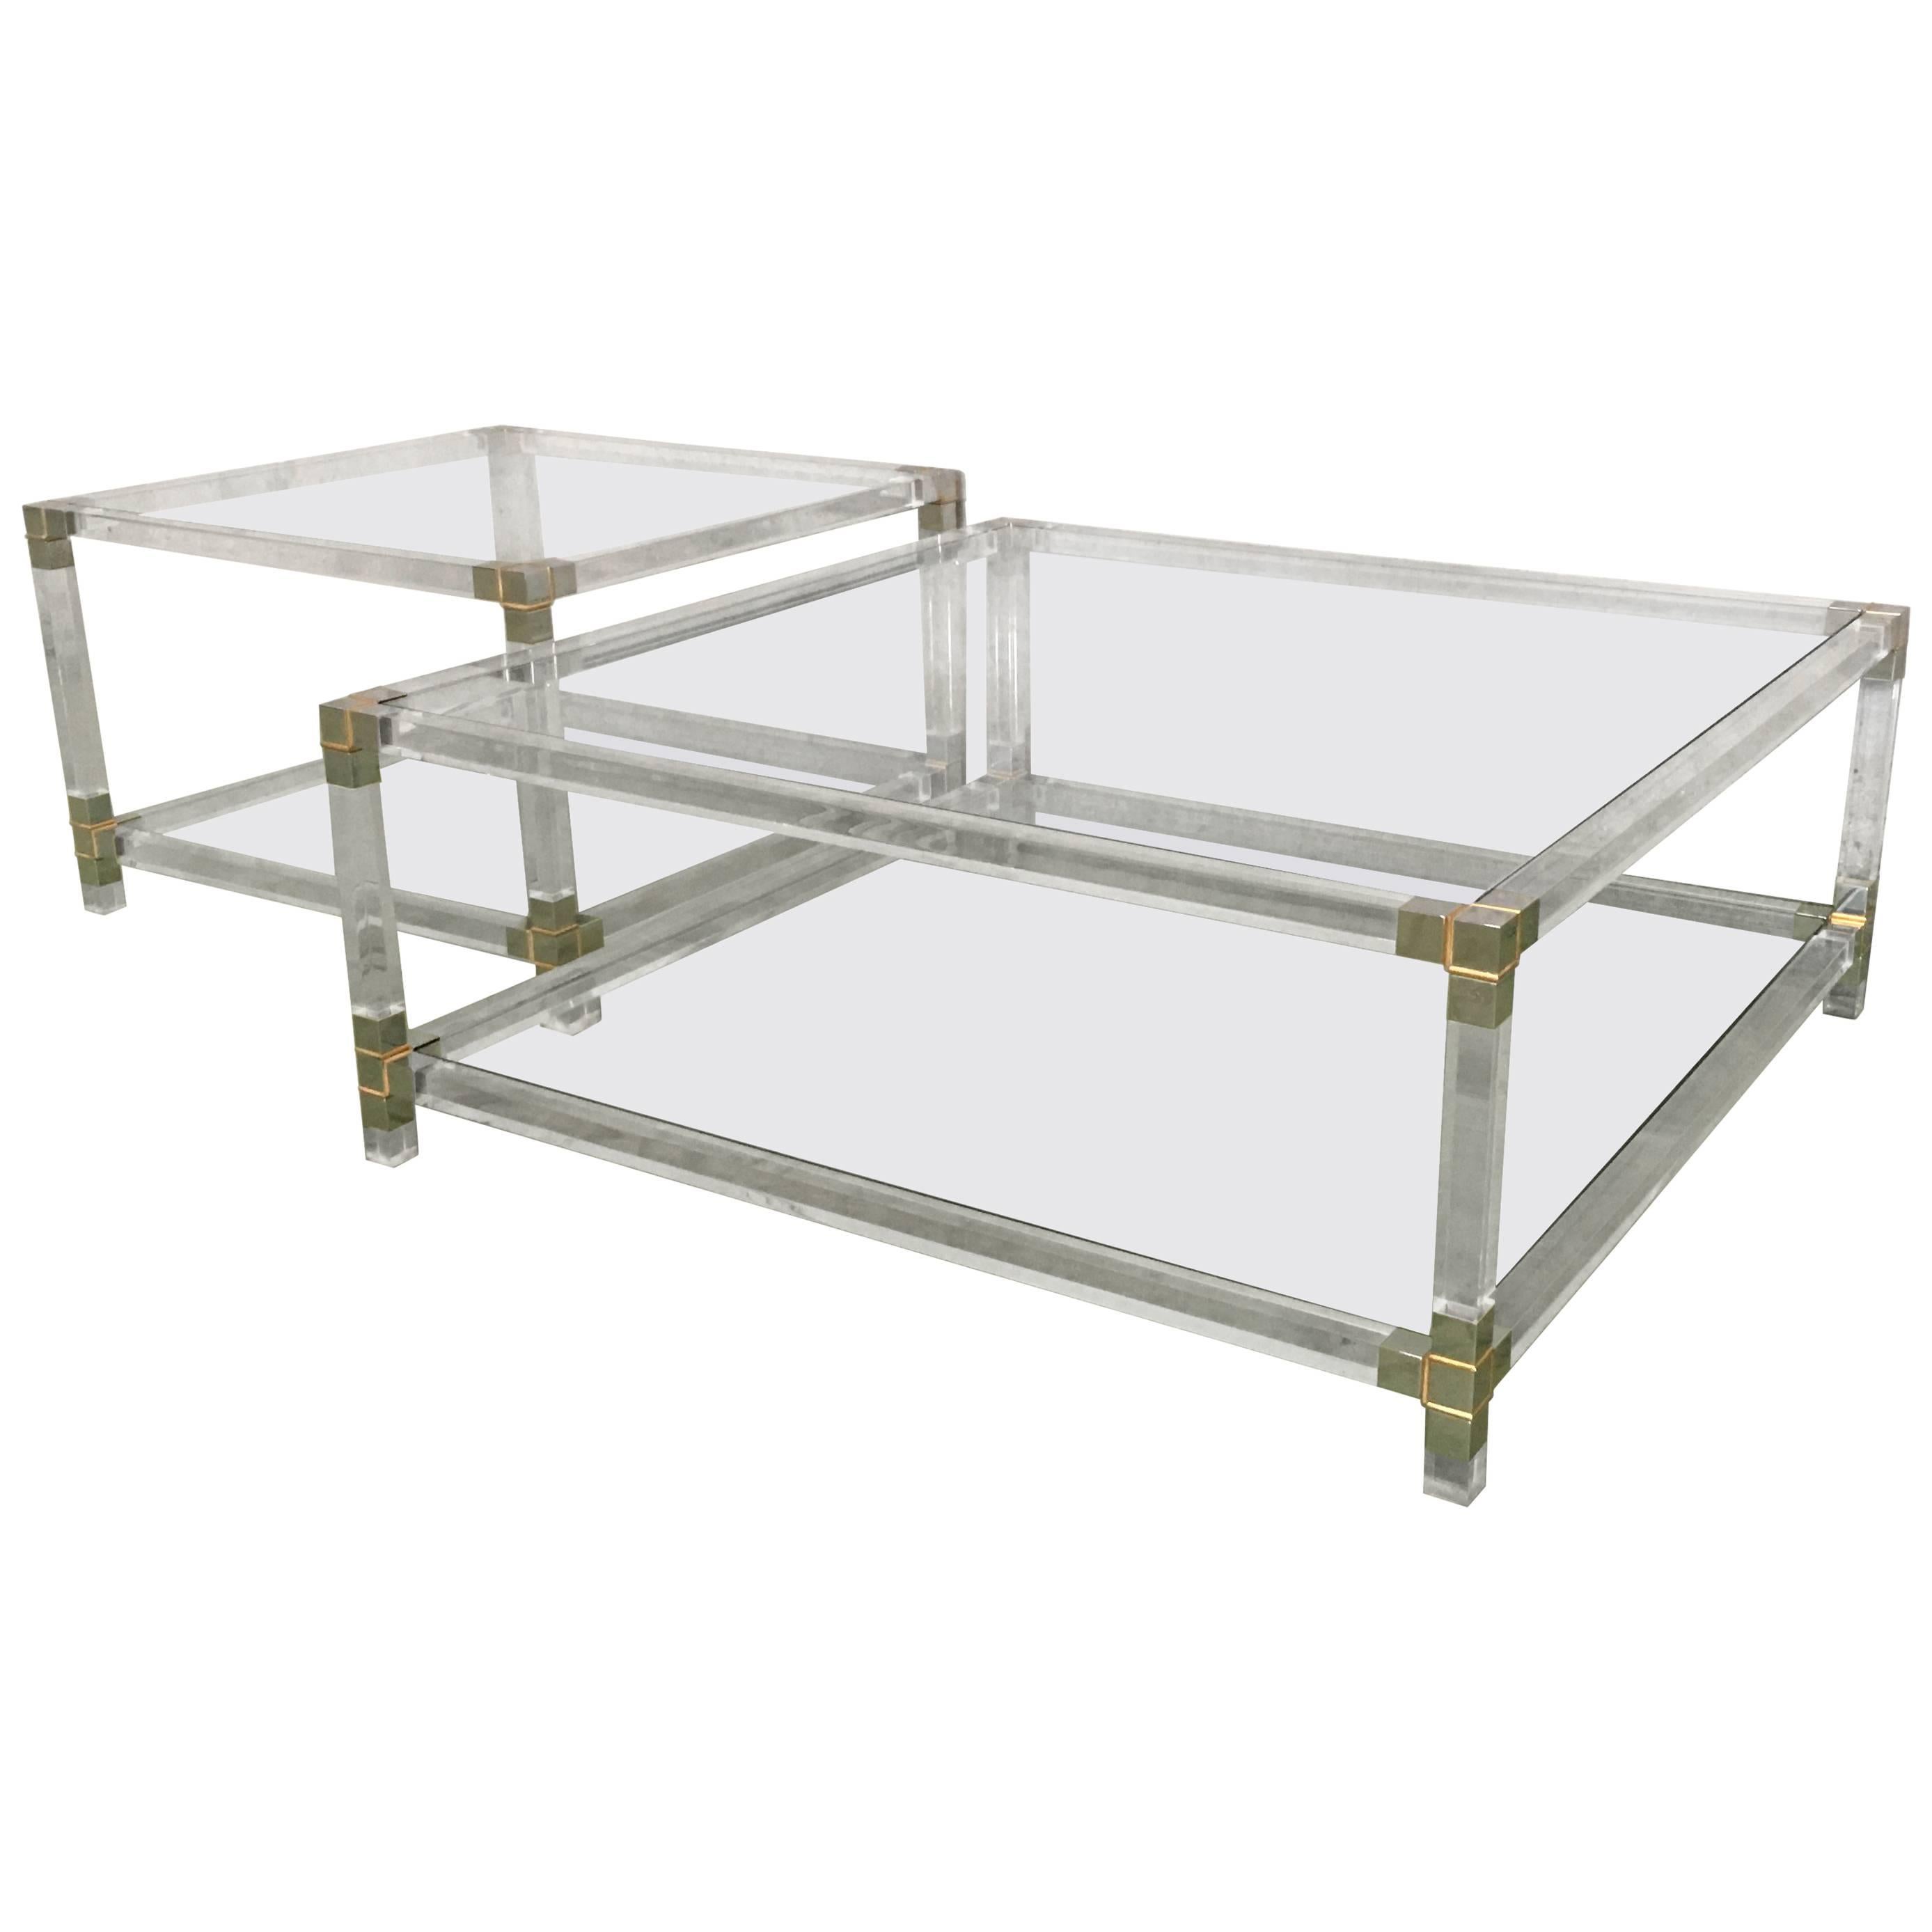 Pair of Midcentury Square Lucite Coffee Tables with Chromed Metal Details For Sale